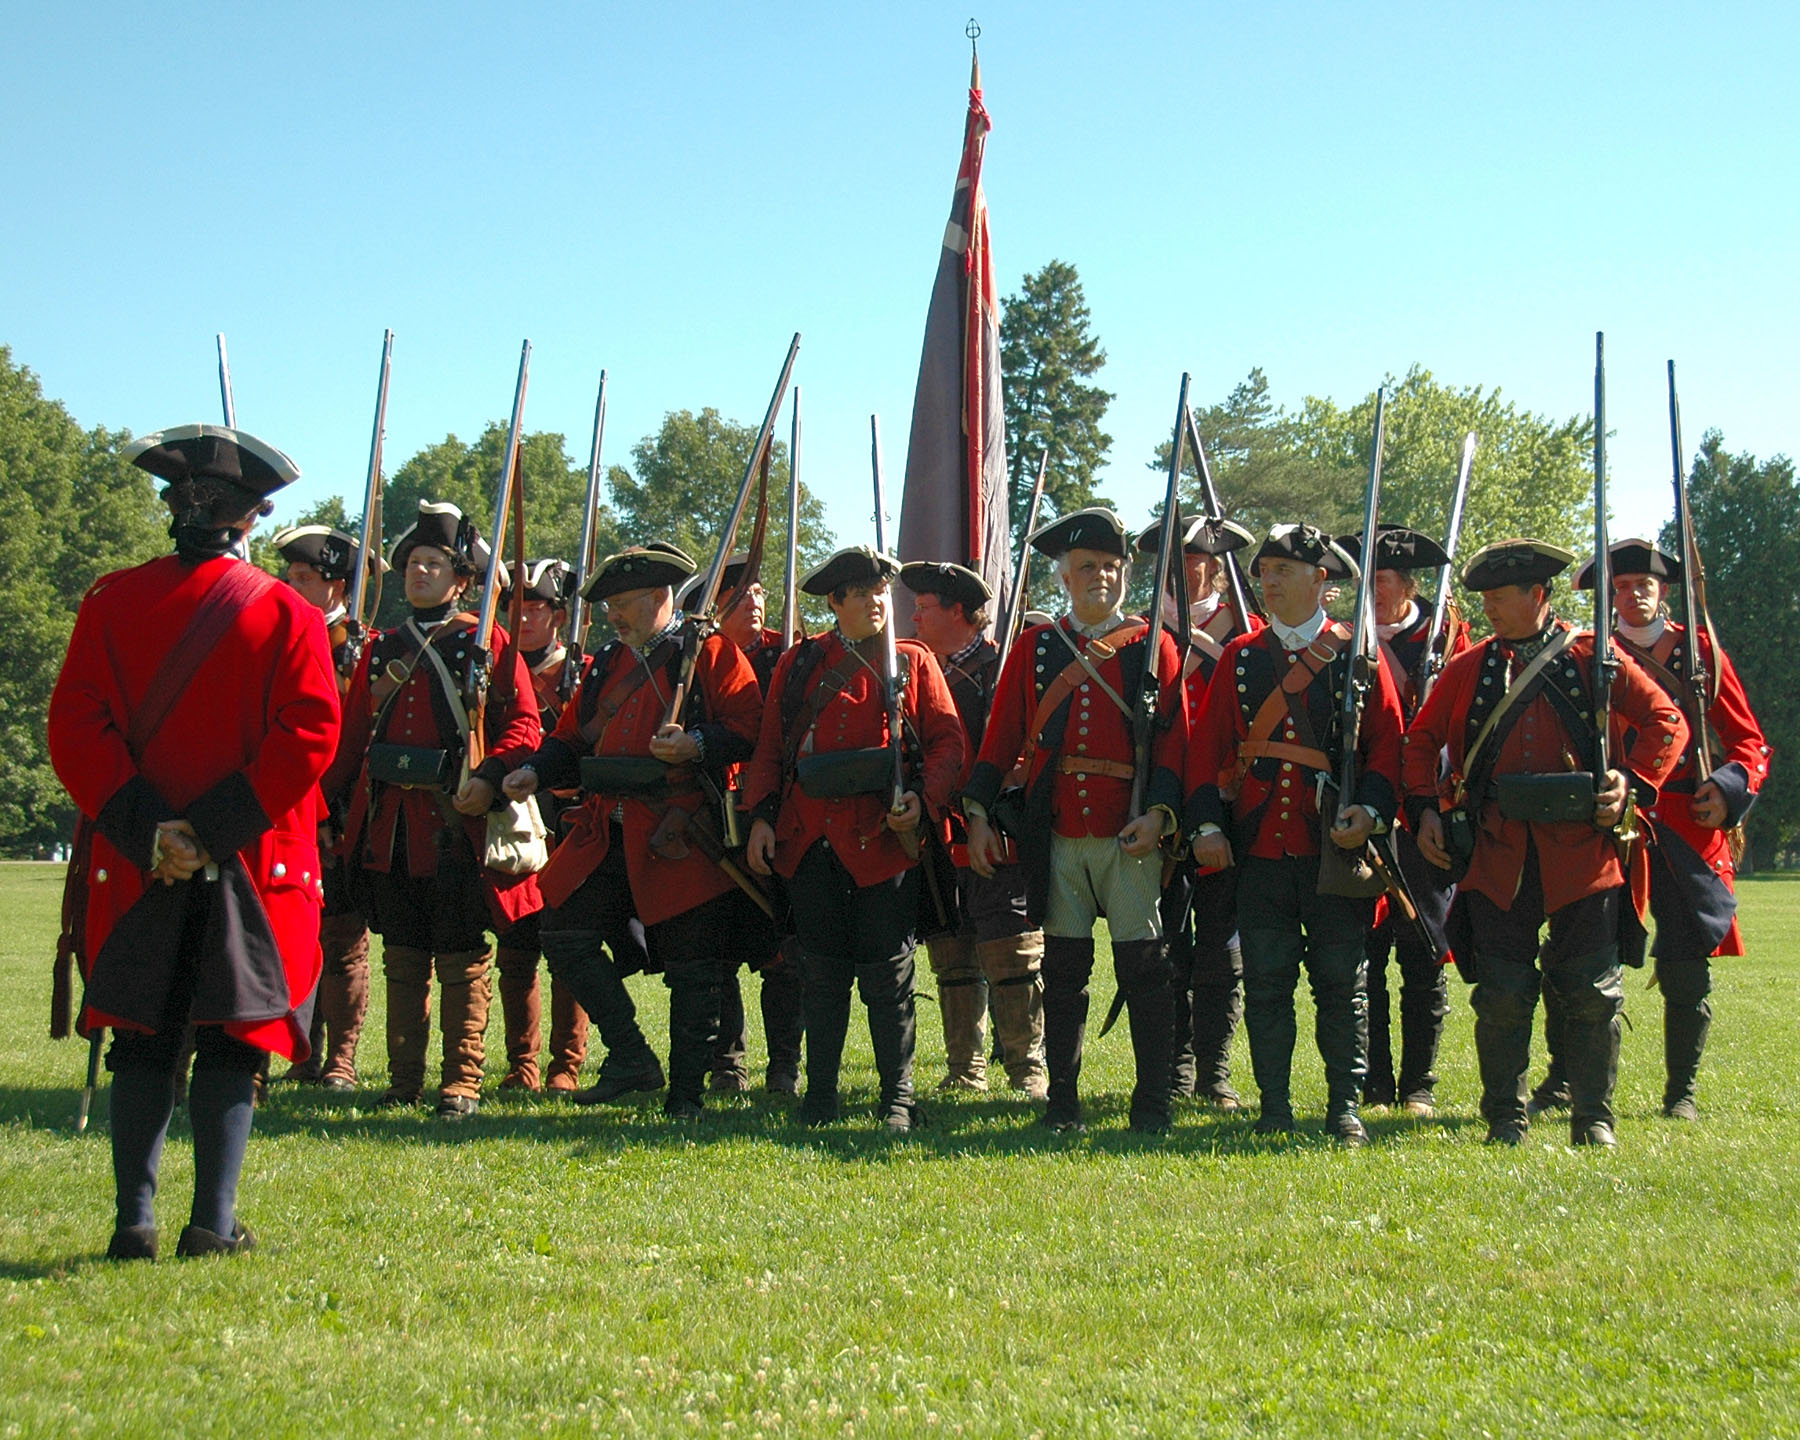 men in red jackets stand in a line with muskets.